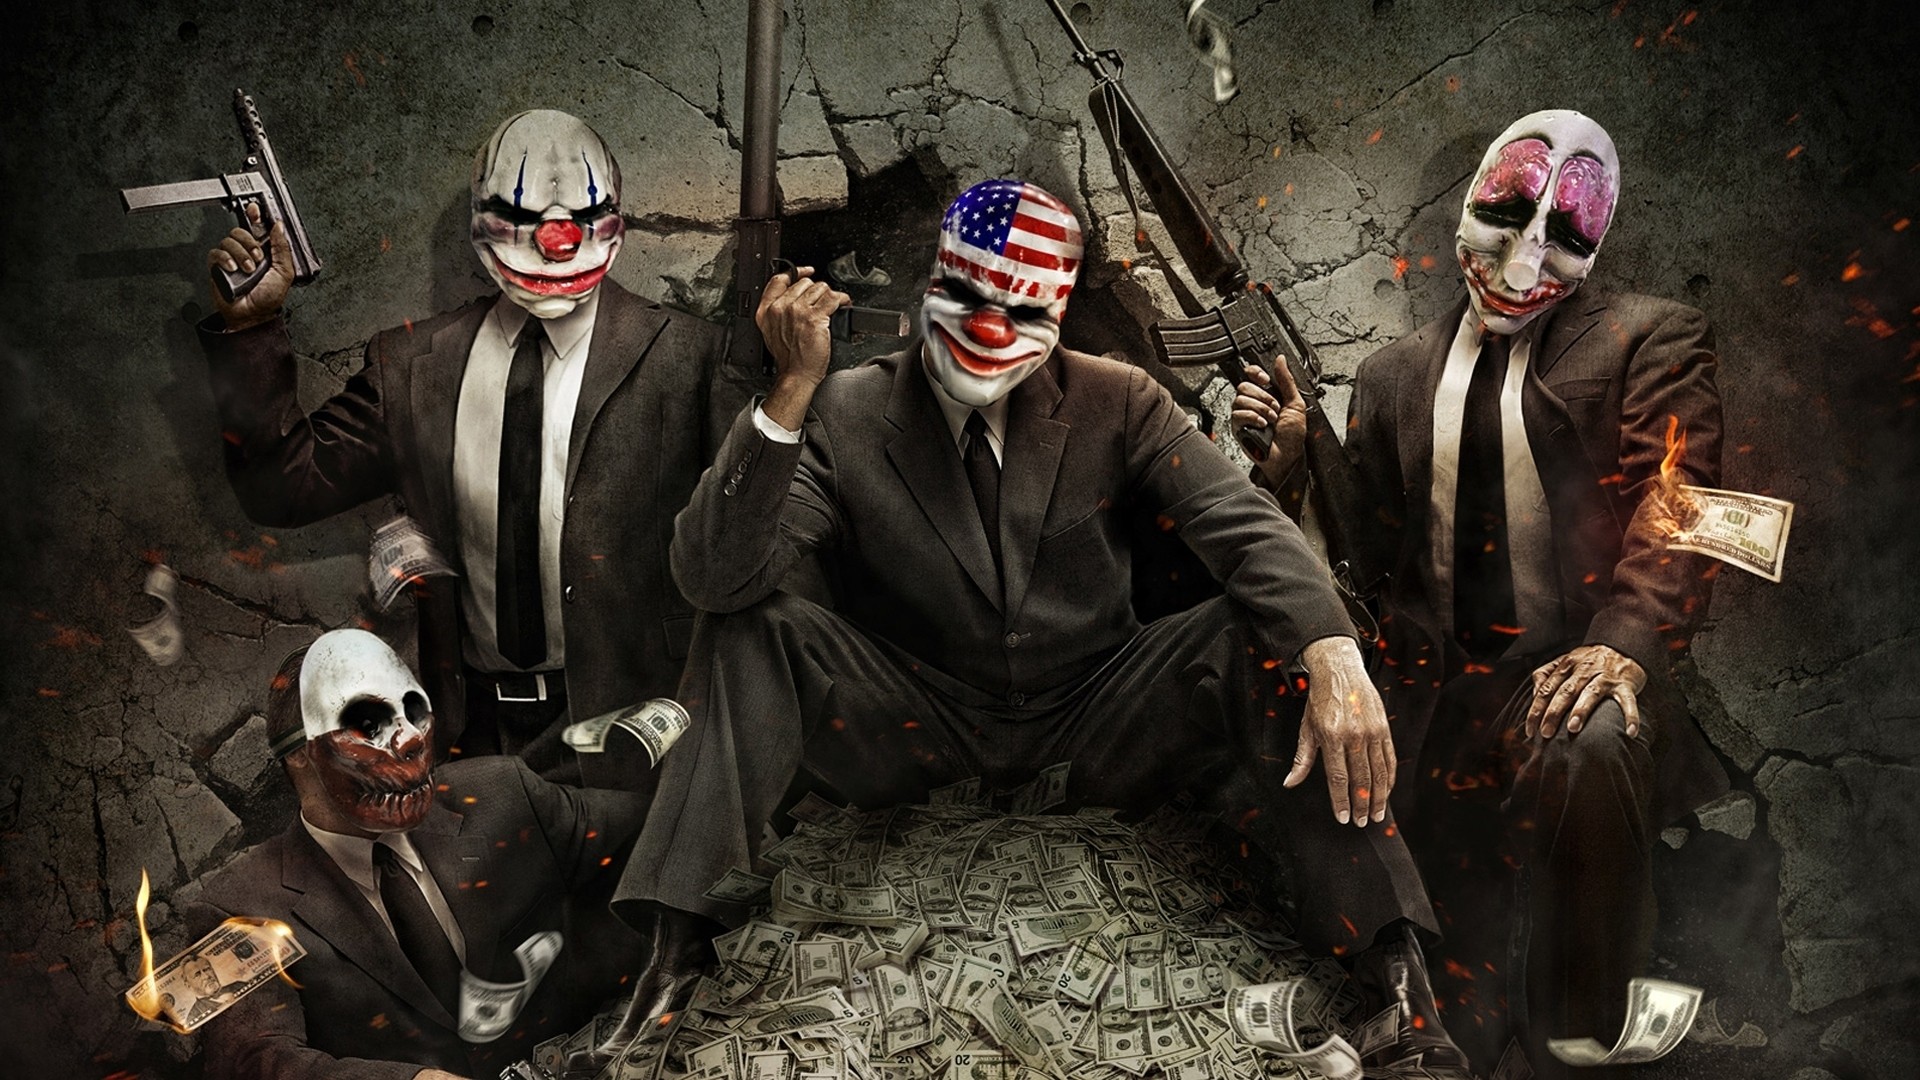 Payday 2 Payday The Heist Wallpapers Hd Desktop And Mobile Images, Photos, Reviews